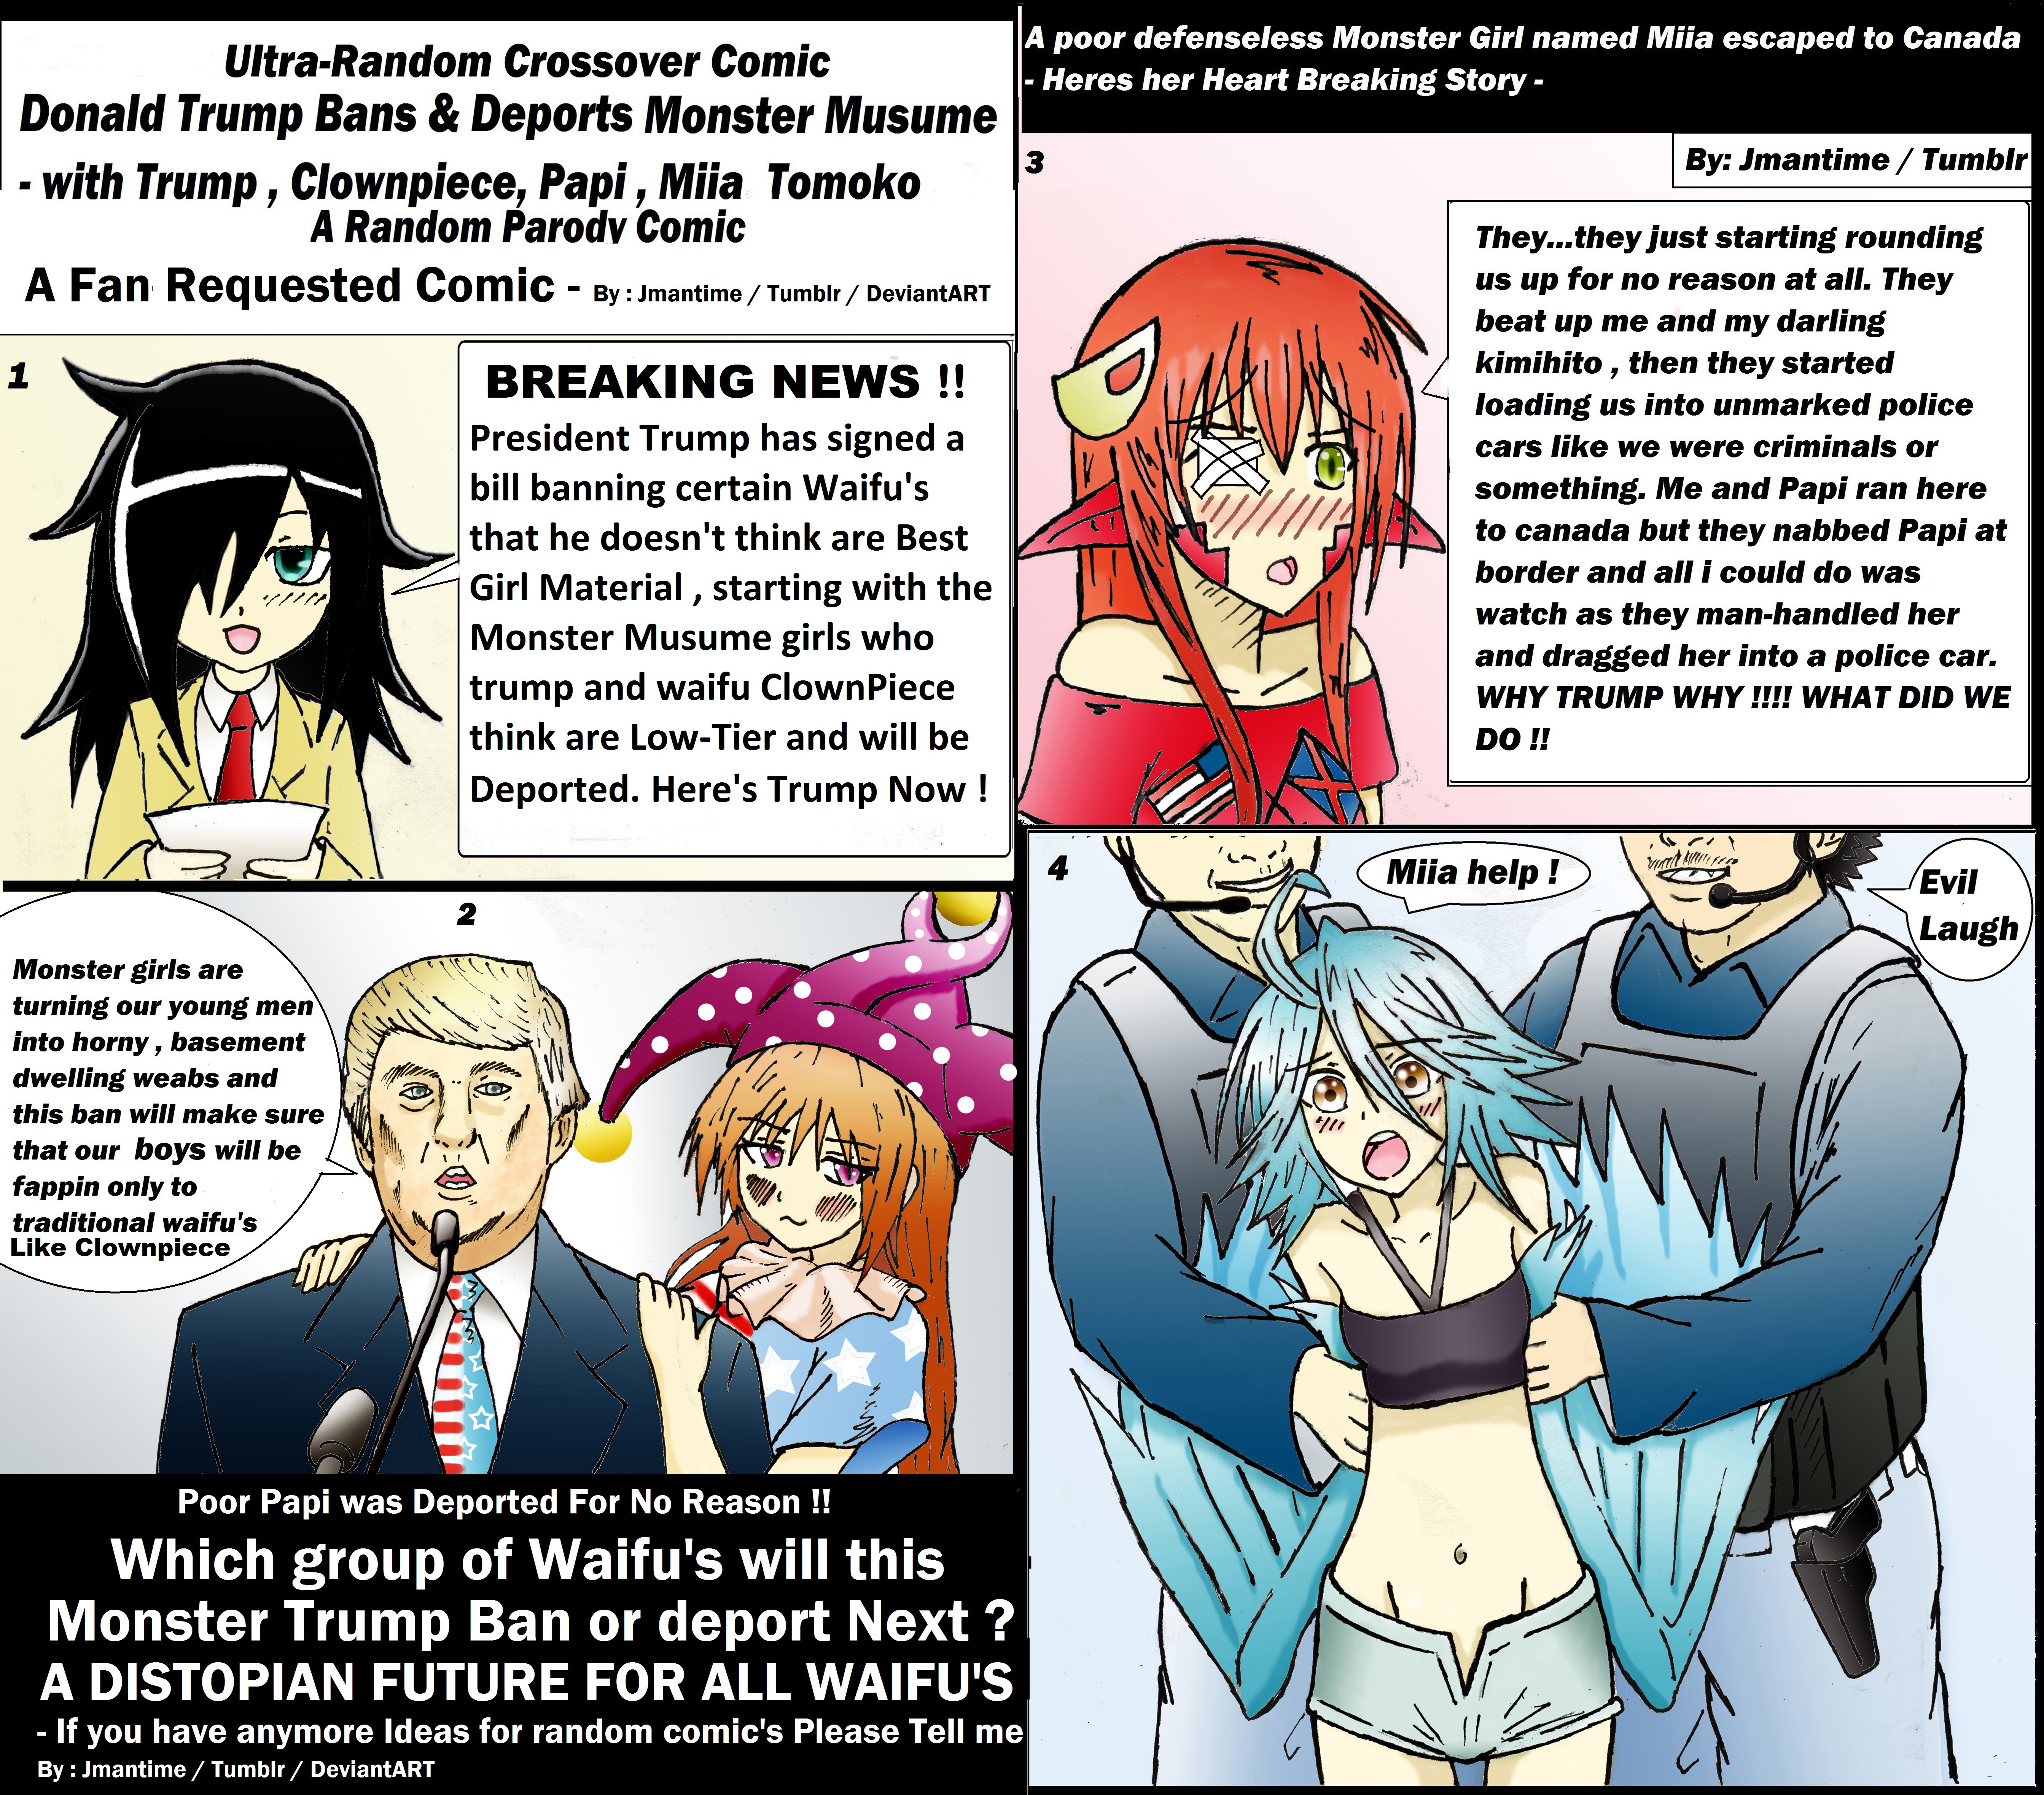 Donald Trump Deports The Monster Musume Girls By Jmantime Is Here On